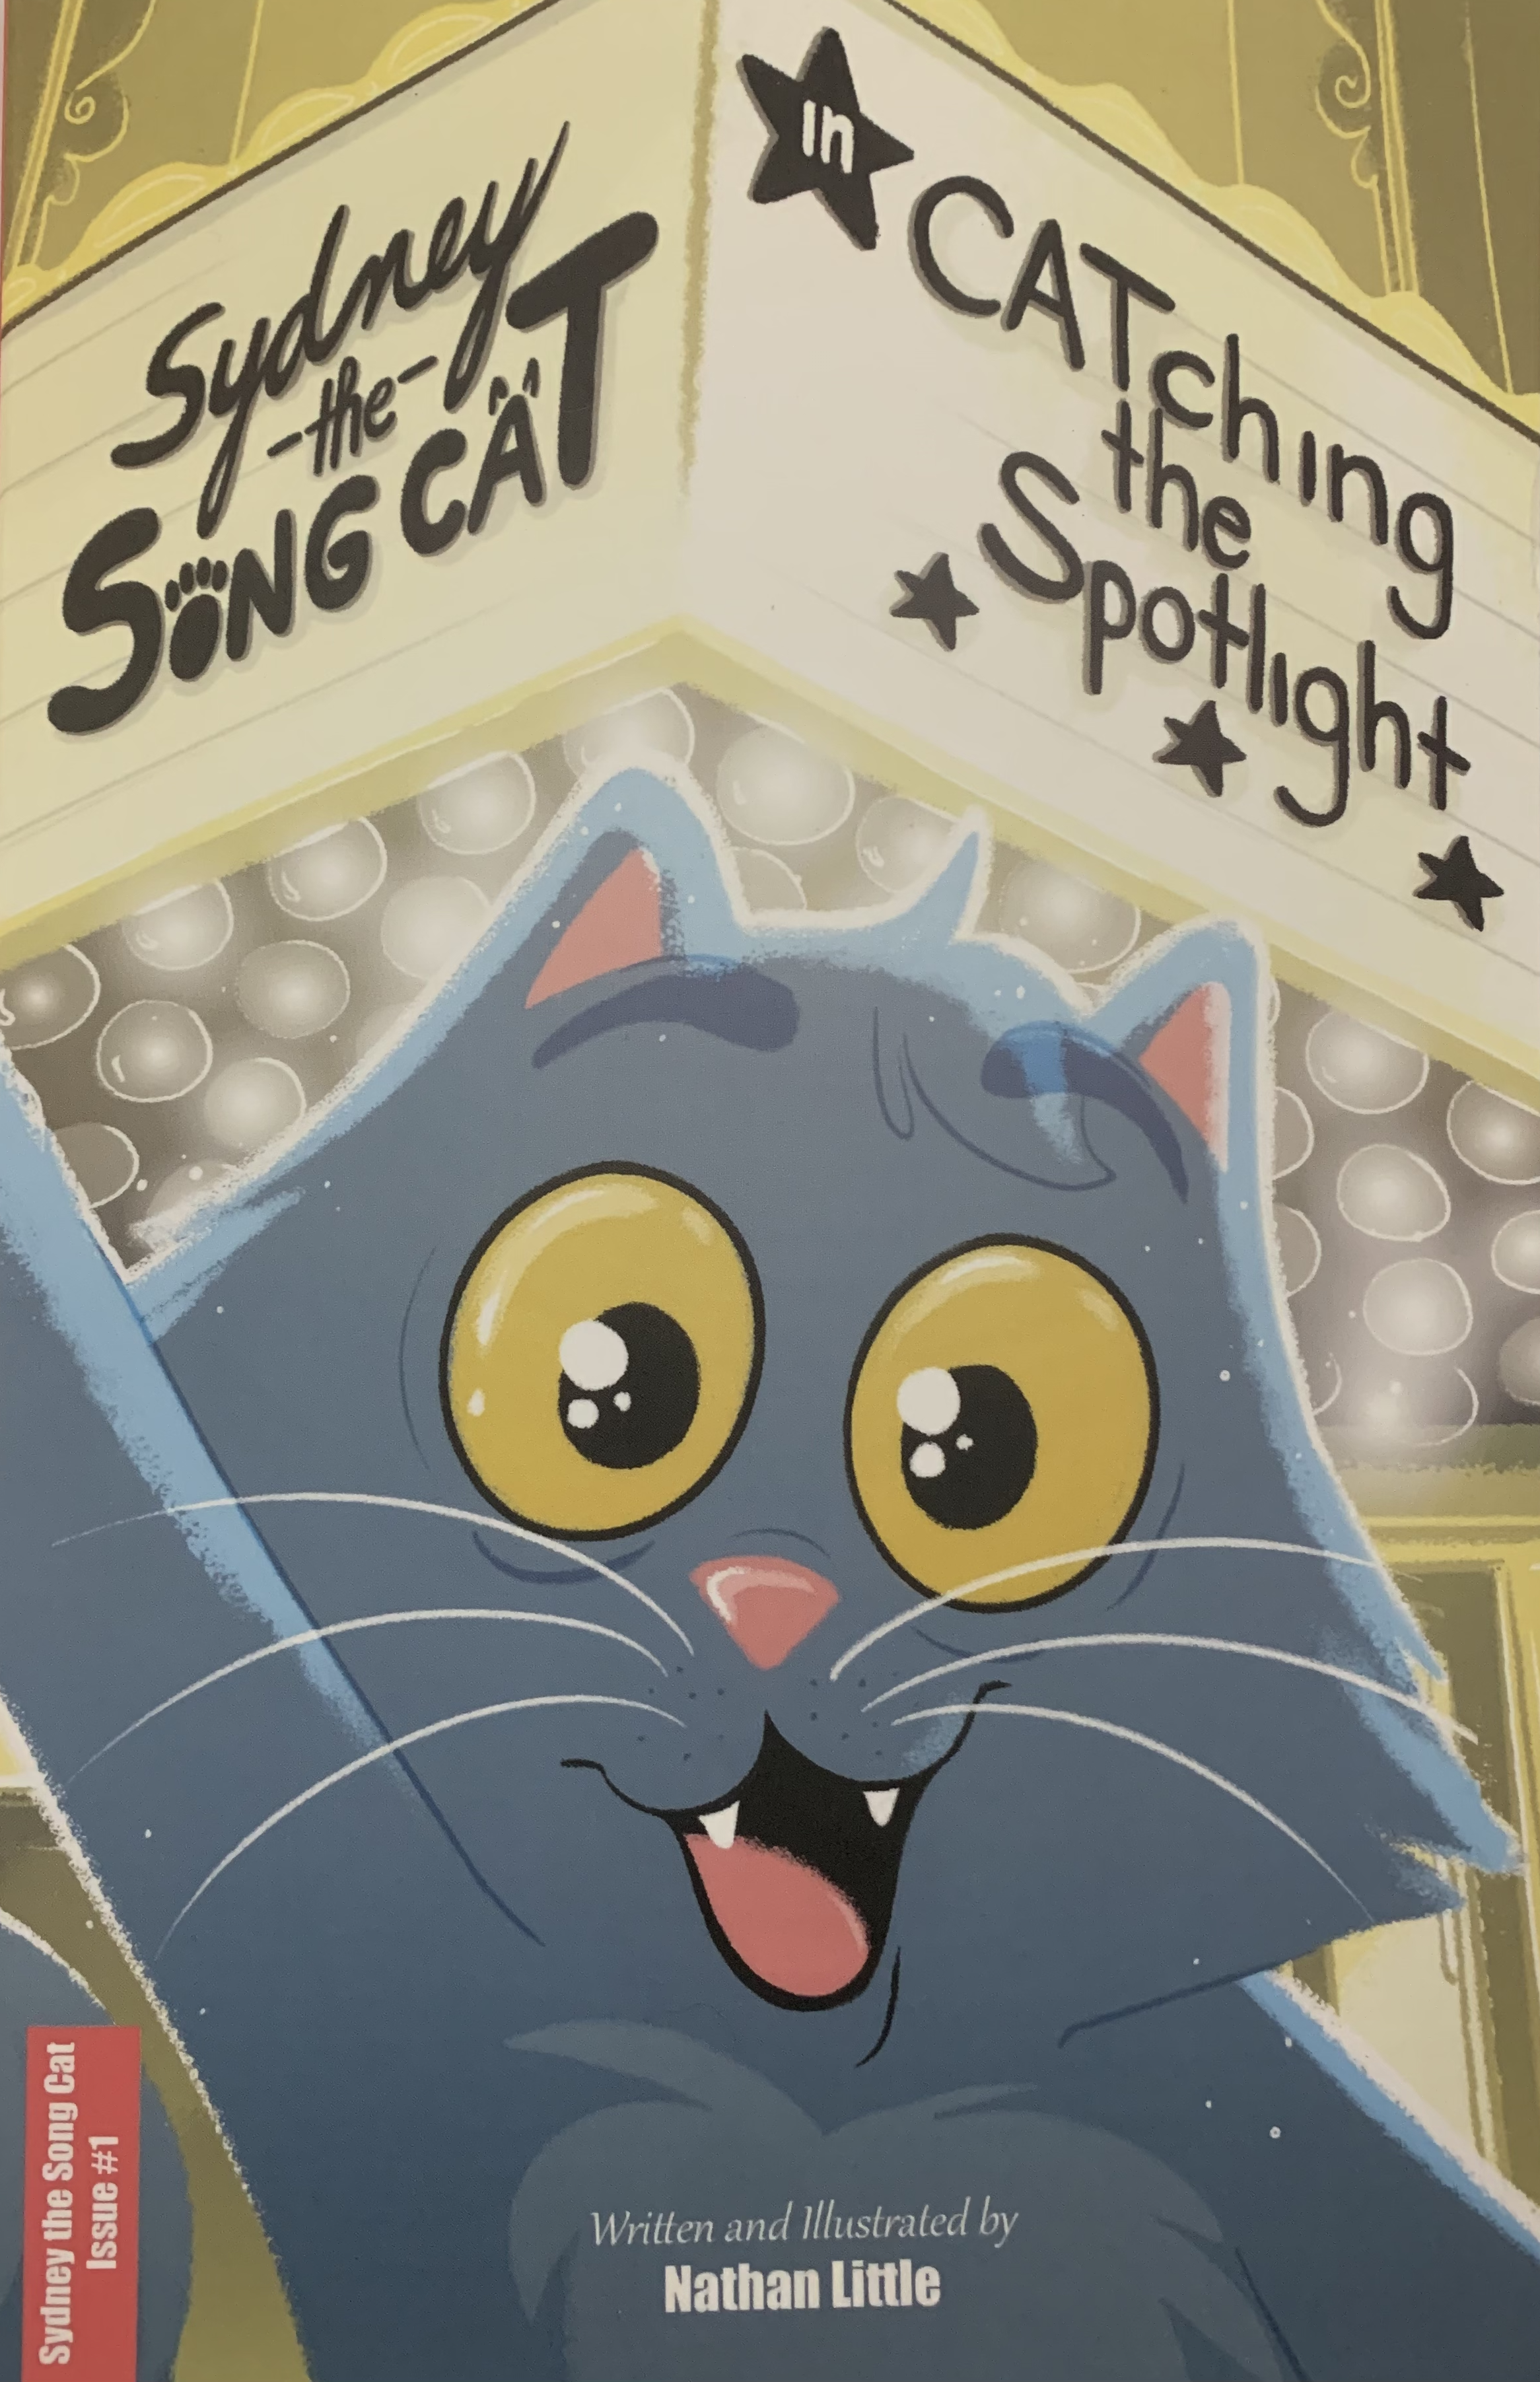 Cover art for Sydney the Song Cat by Nathan Little